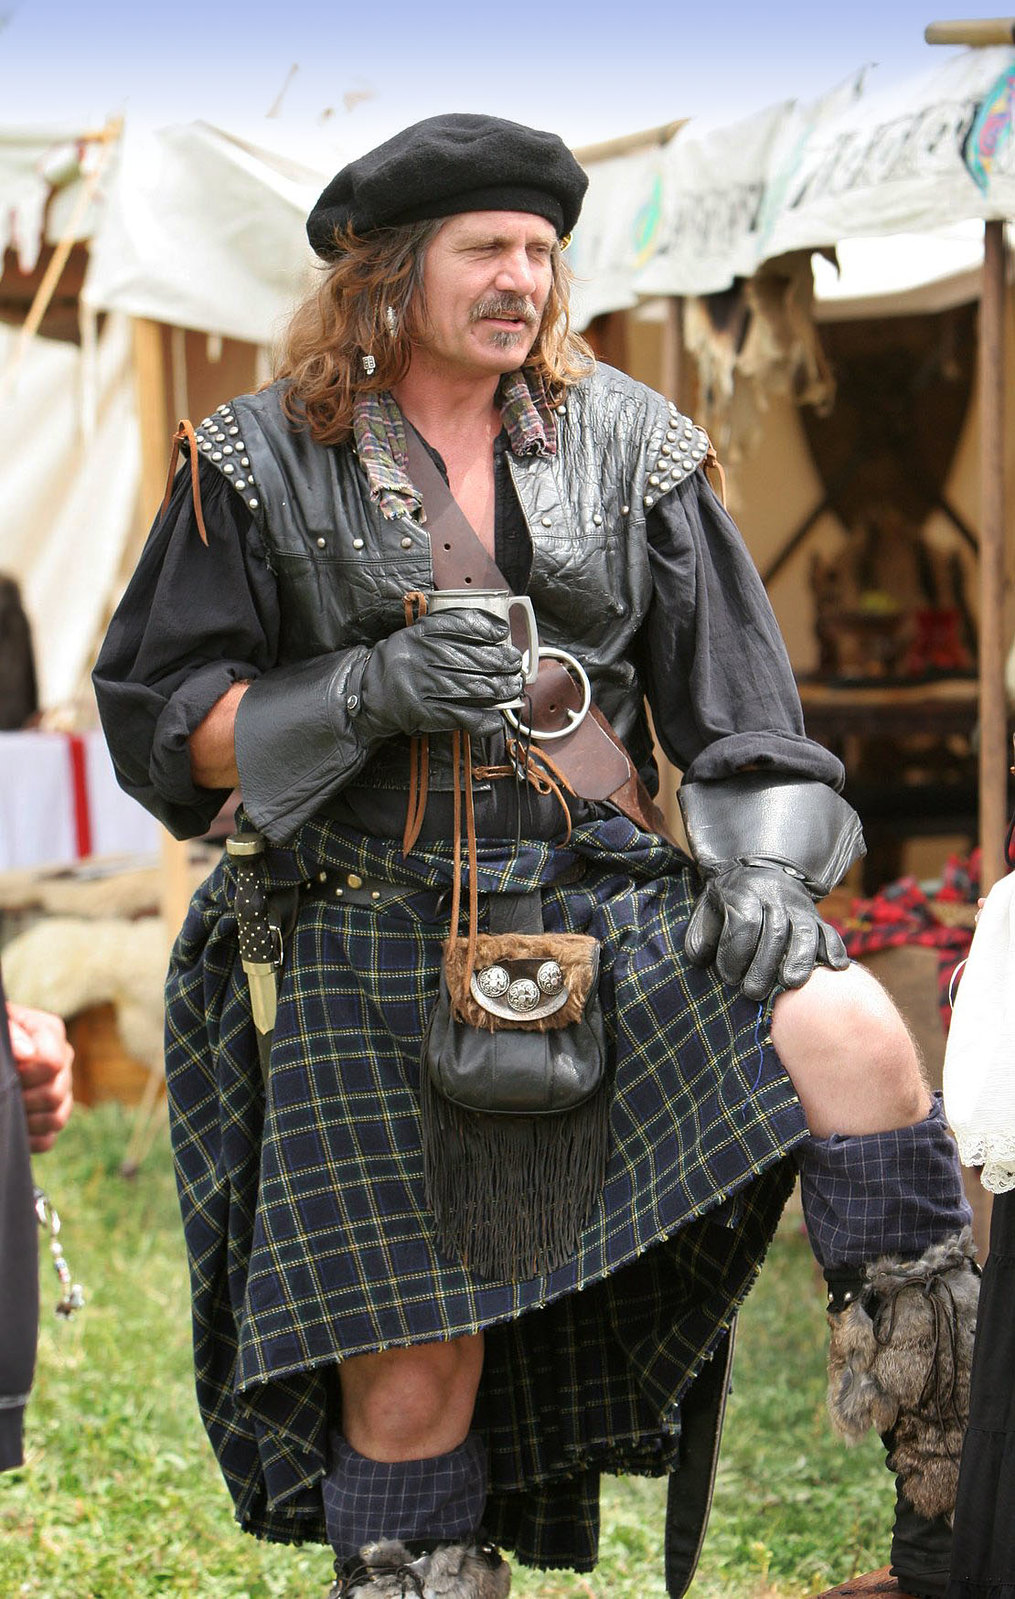 A belted plaid (rather than a kilt) as worn by a reenactor of Scottish history.